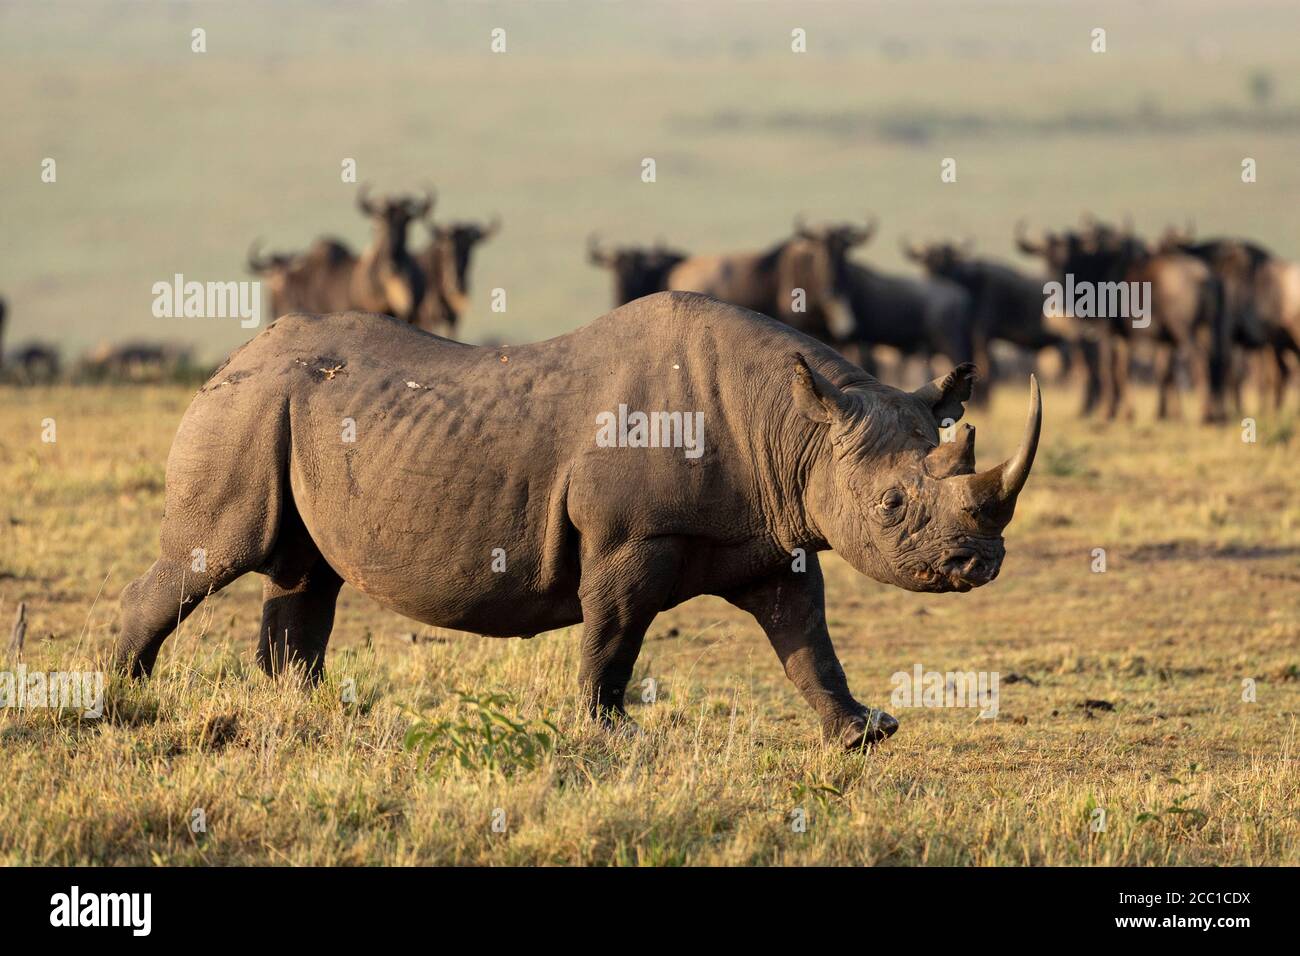 Black rhino walking in the afternoon sunlight with a herd of wildebeest watching him in the background in Masai Mara Kenya Stock Photo